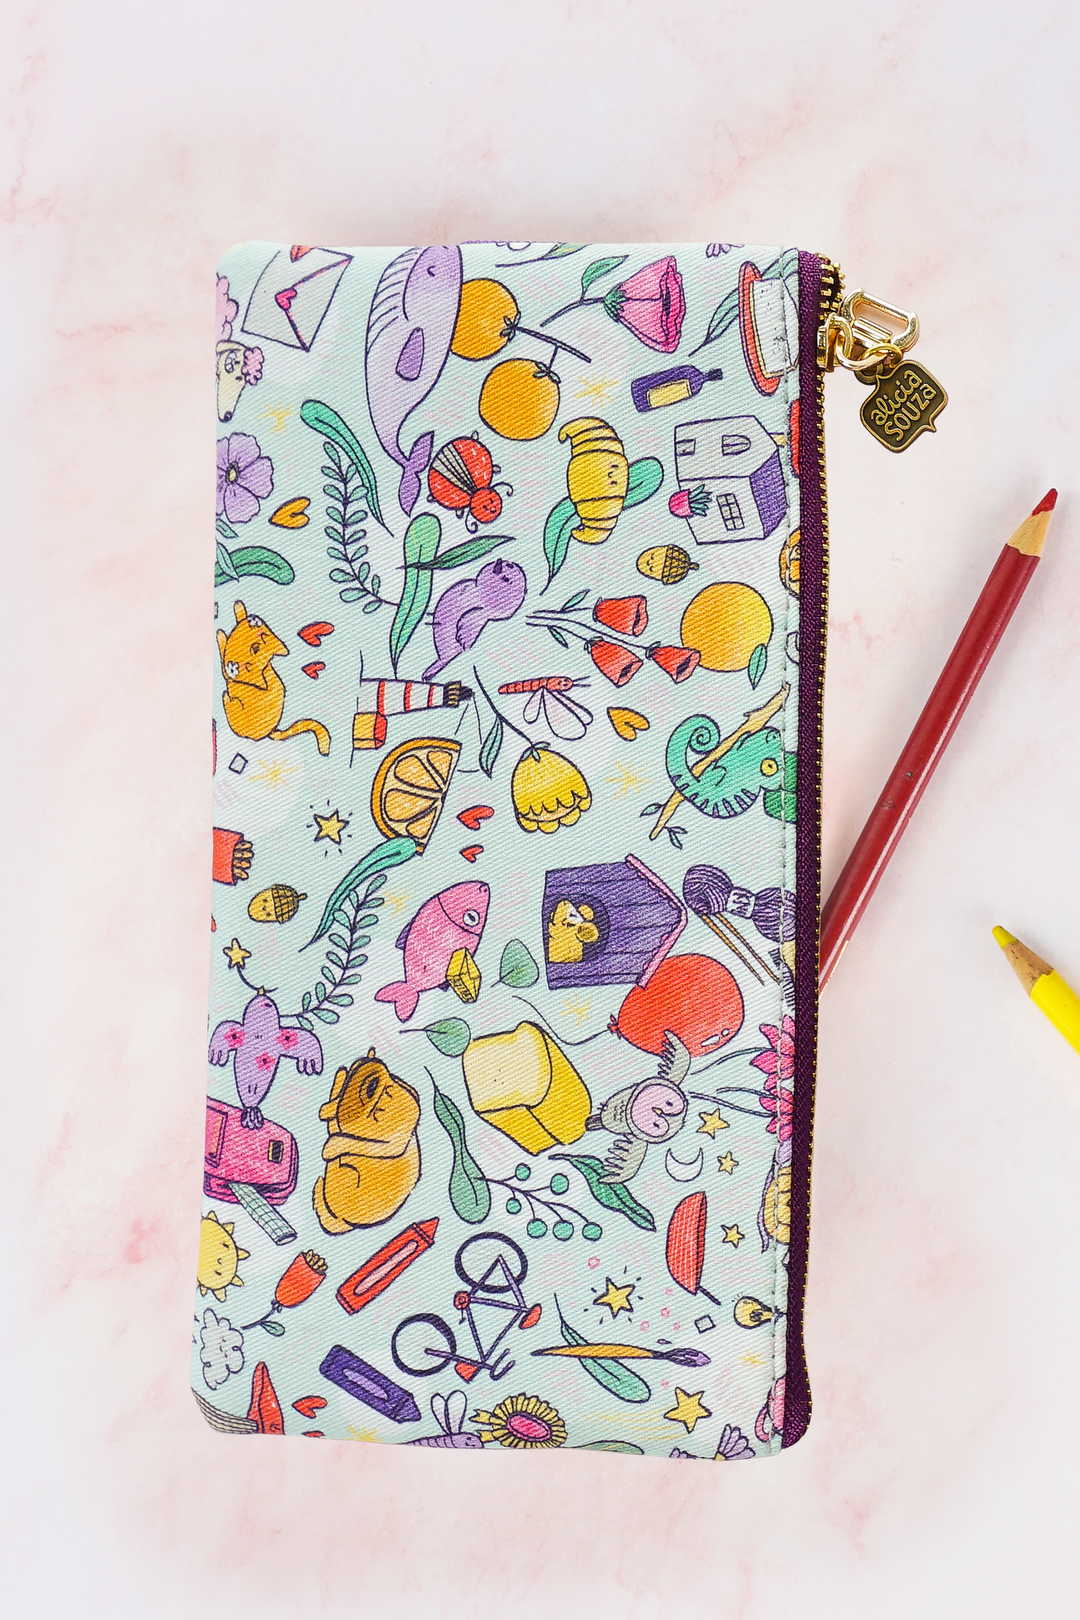 Wonderful World Pencil Pouch + Pencils + Sticky Notes Combo